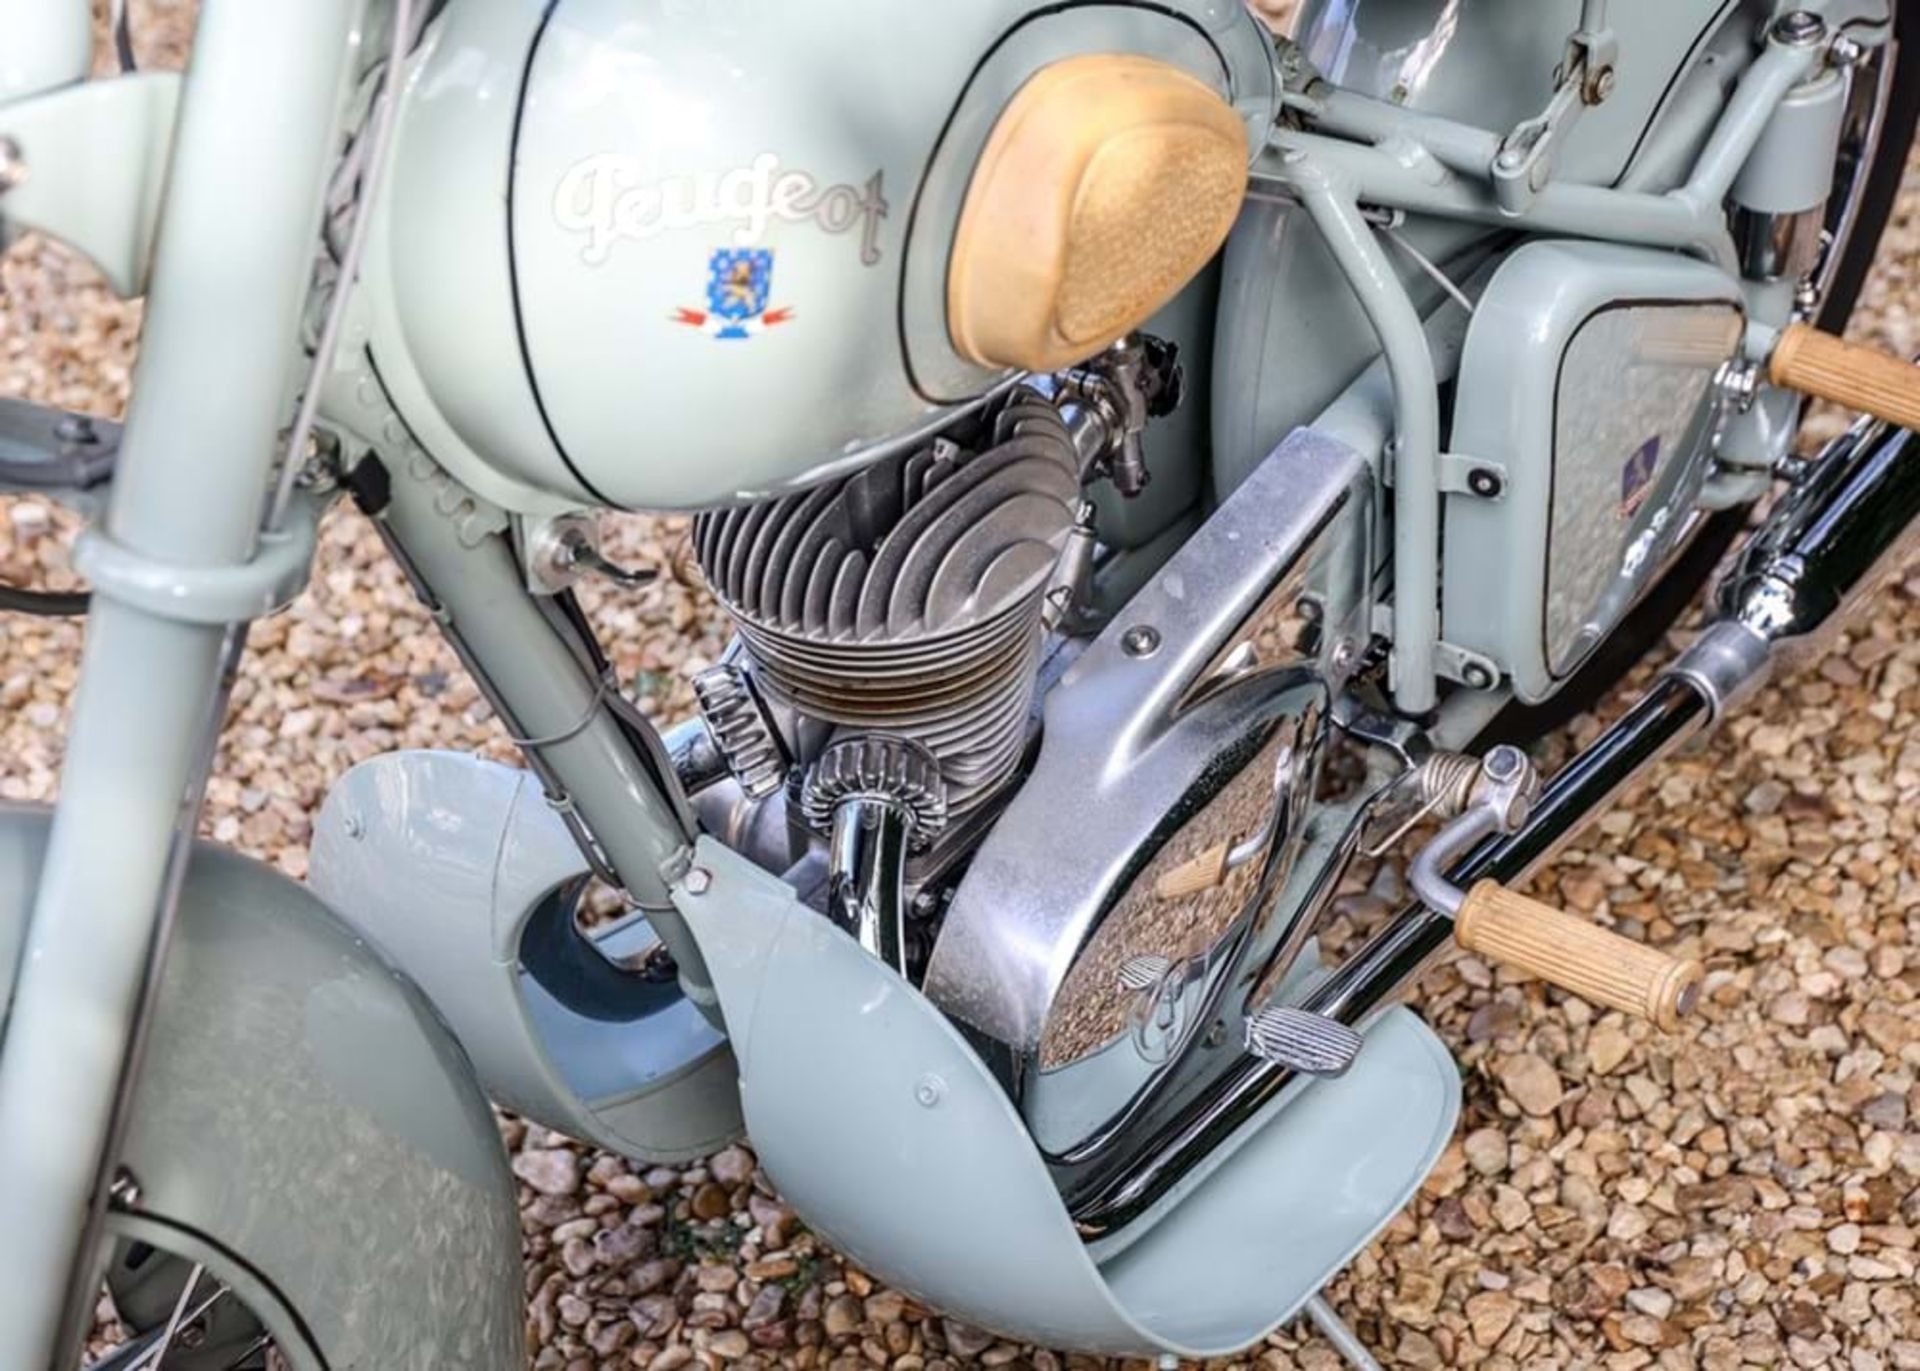 1953 Peugeot Type 55 TCL (125cc) - Image 5 of 10